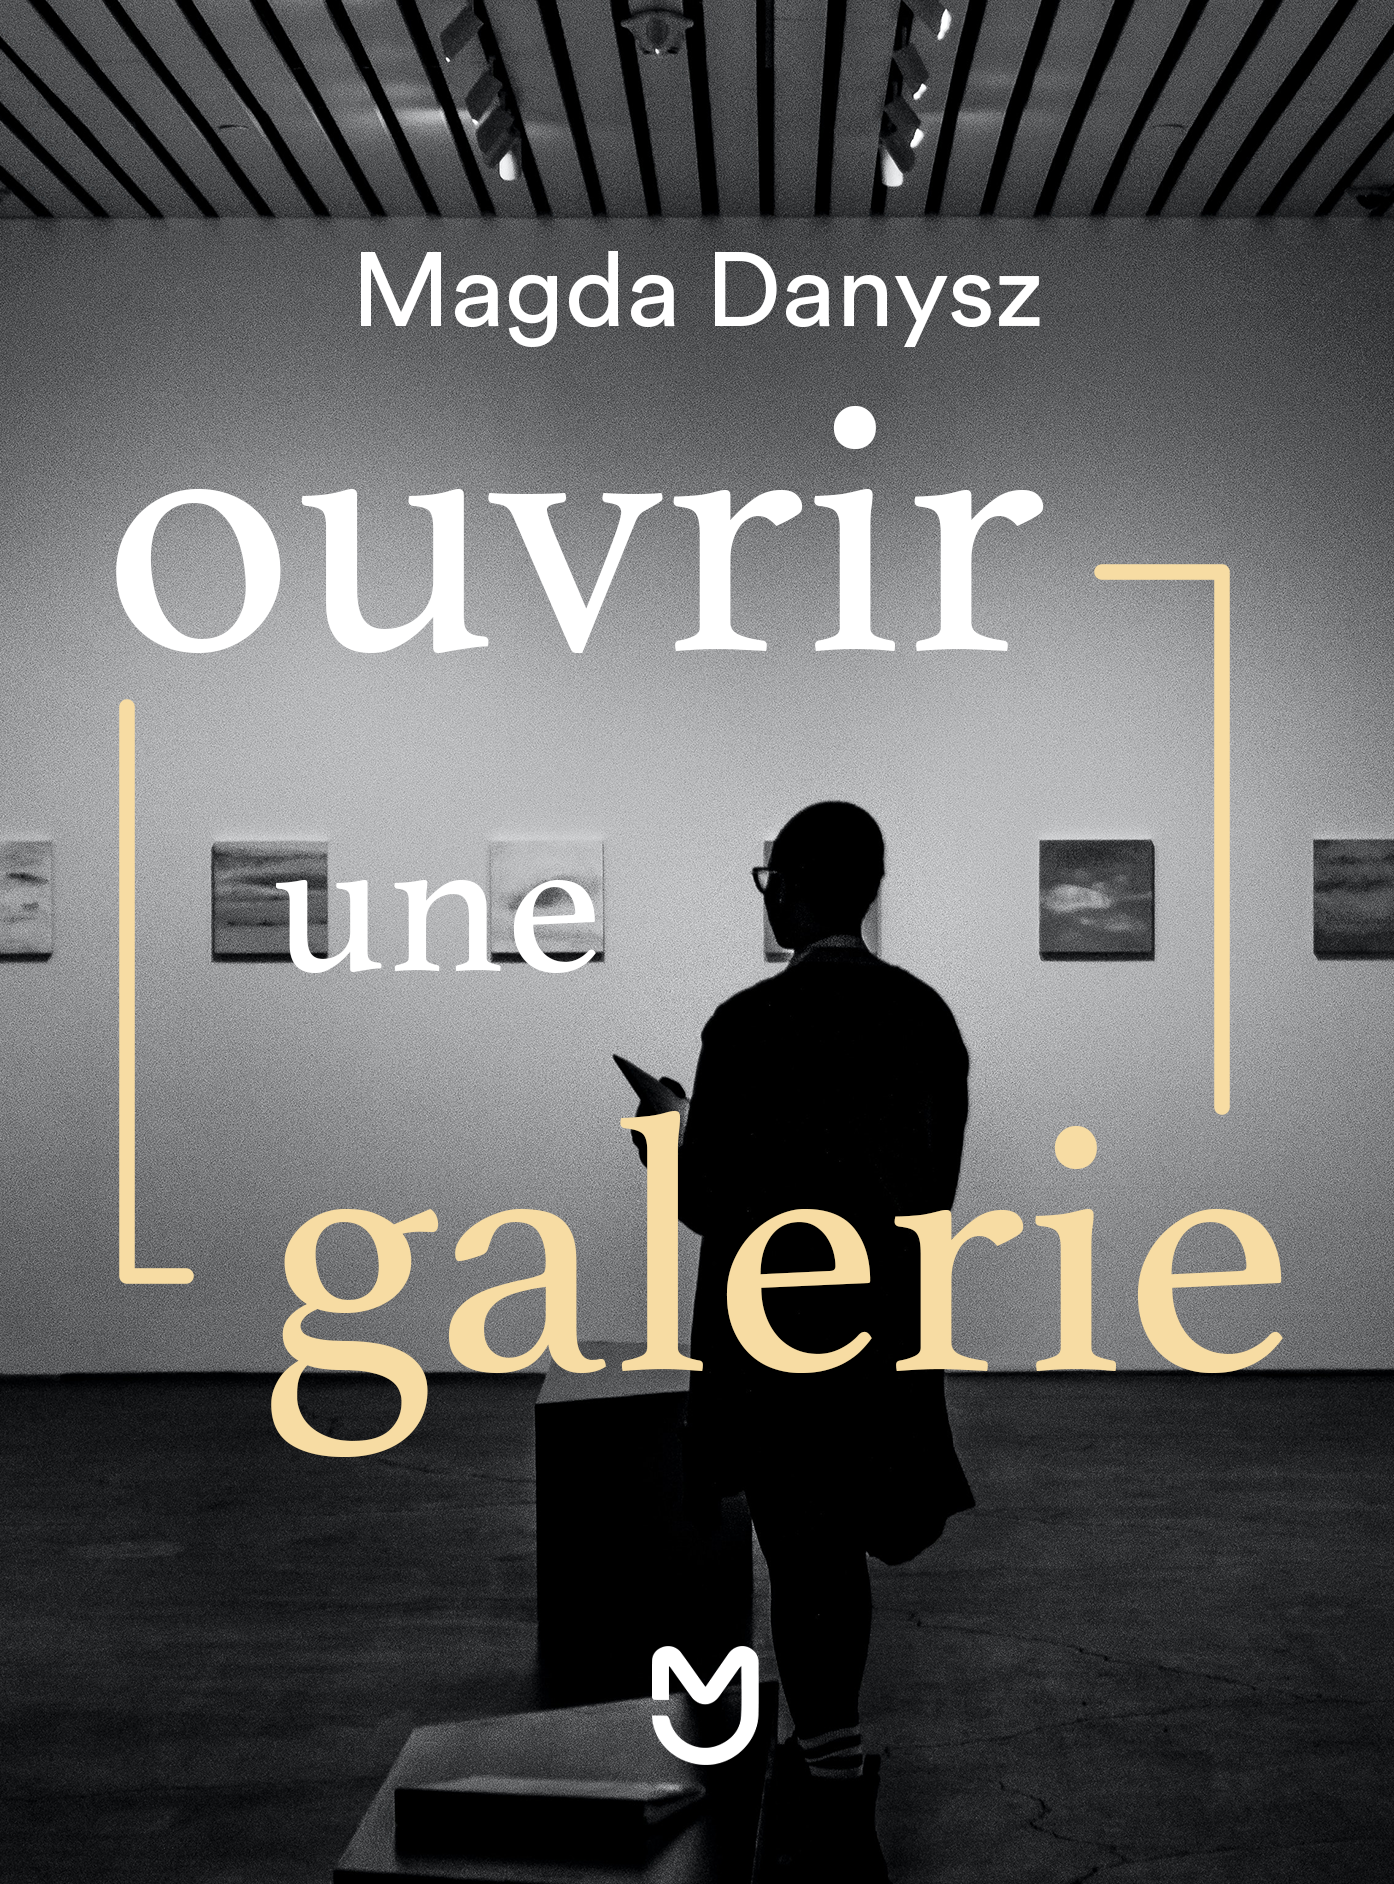 Ouvrir une galerie